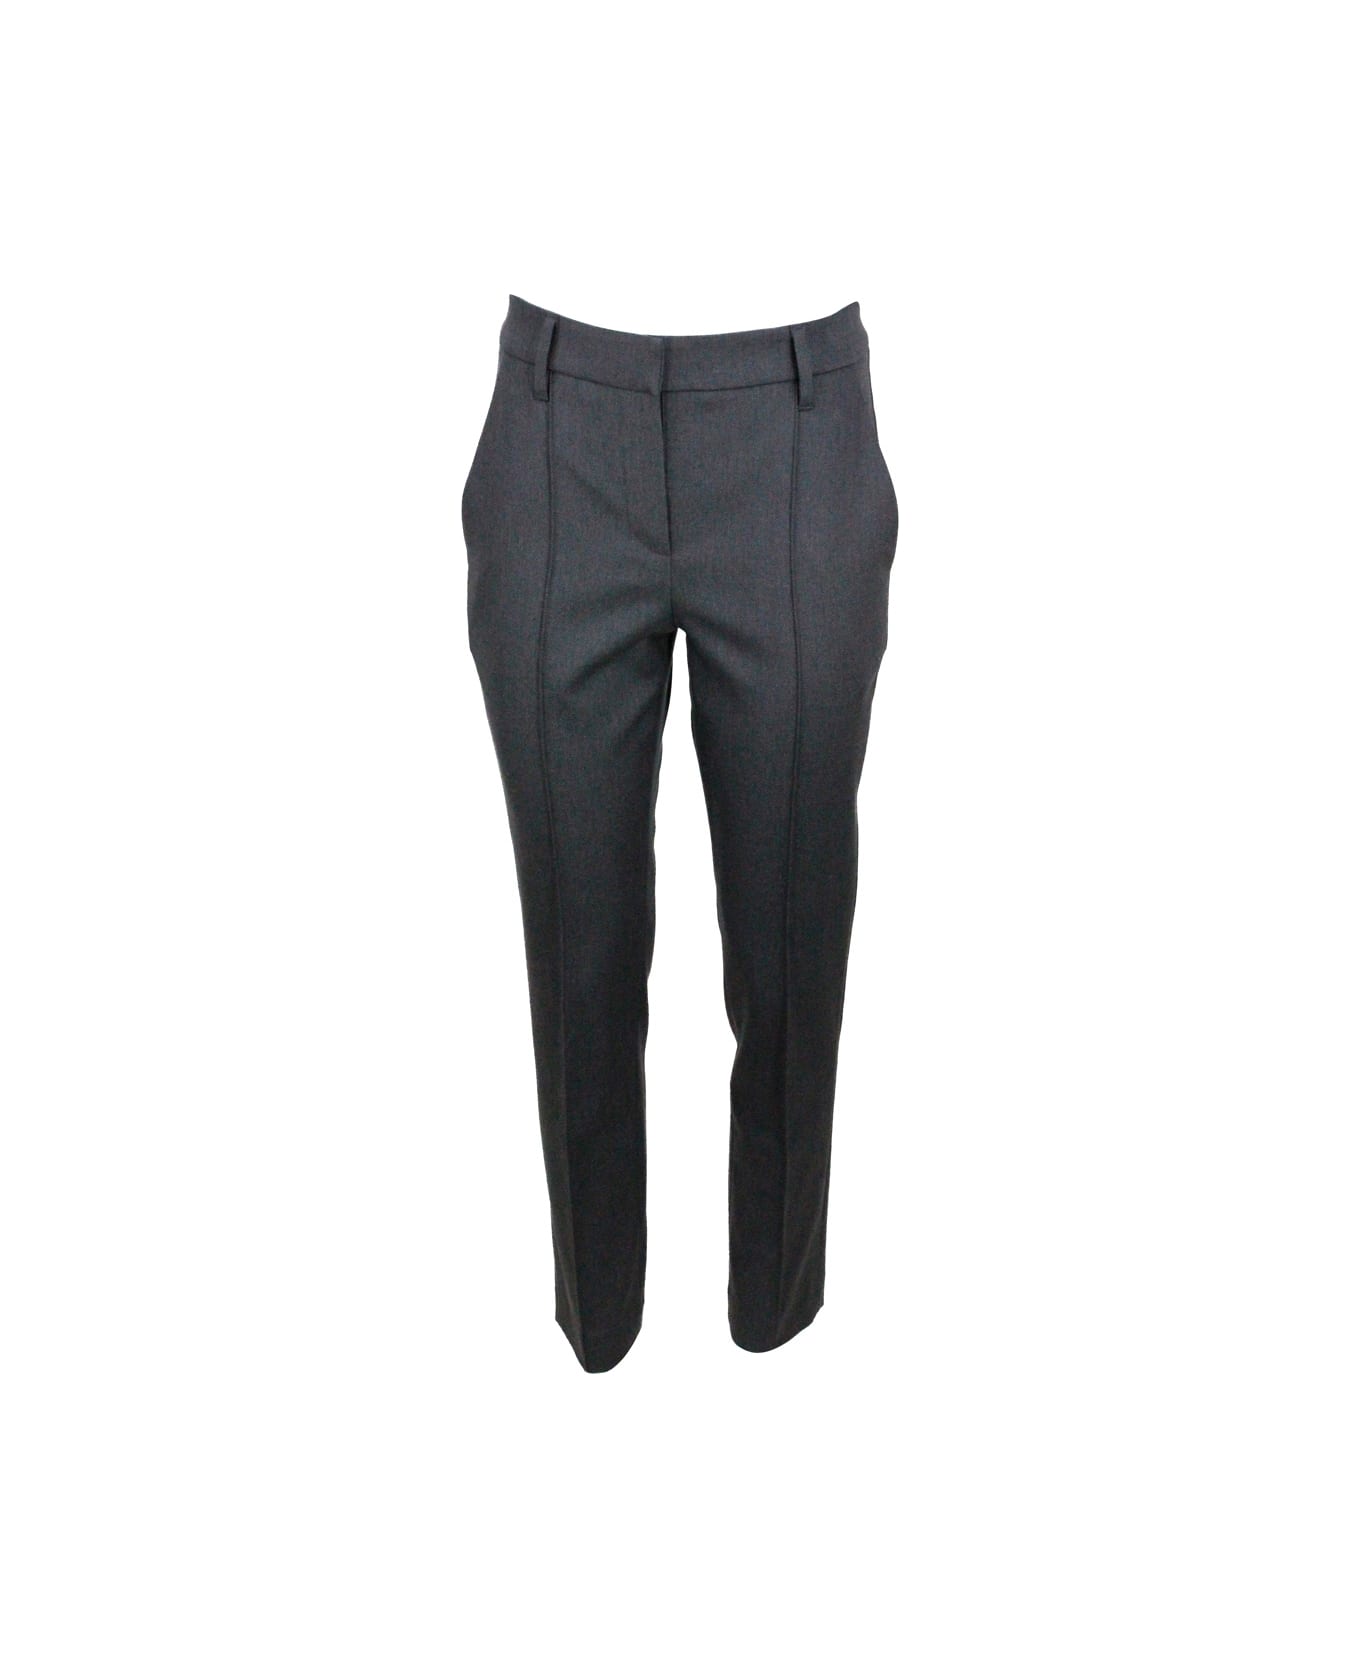 Brunello Cucinelli Stretch Cotton Drill Trousers With Monili On The Back Loop - Grey ボトムス